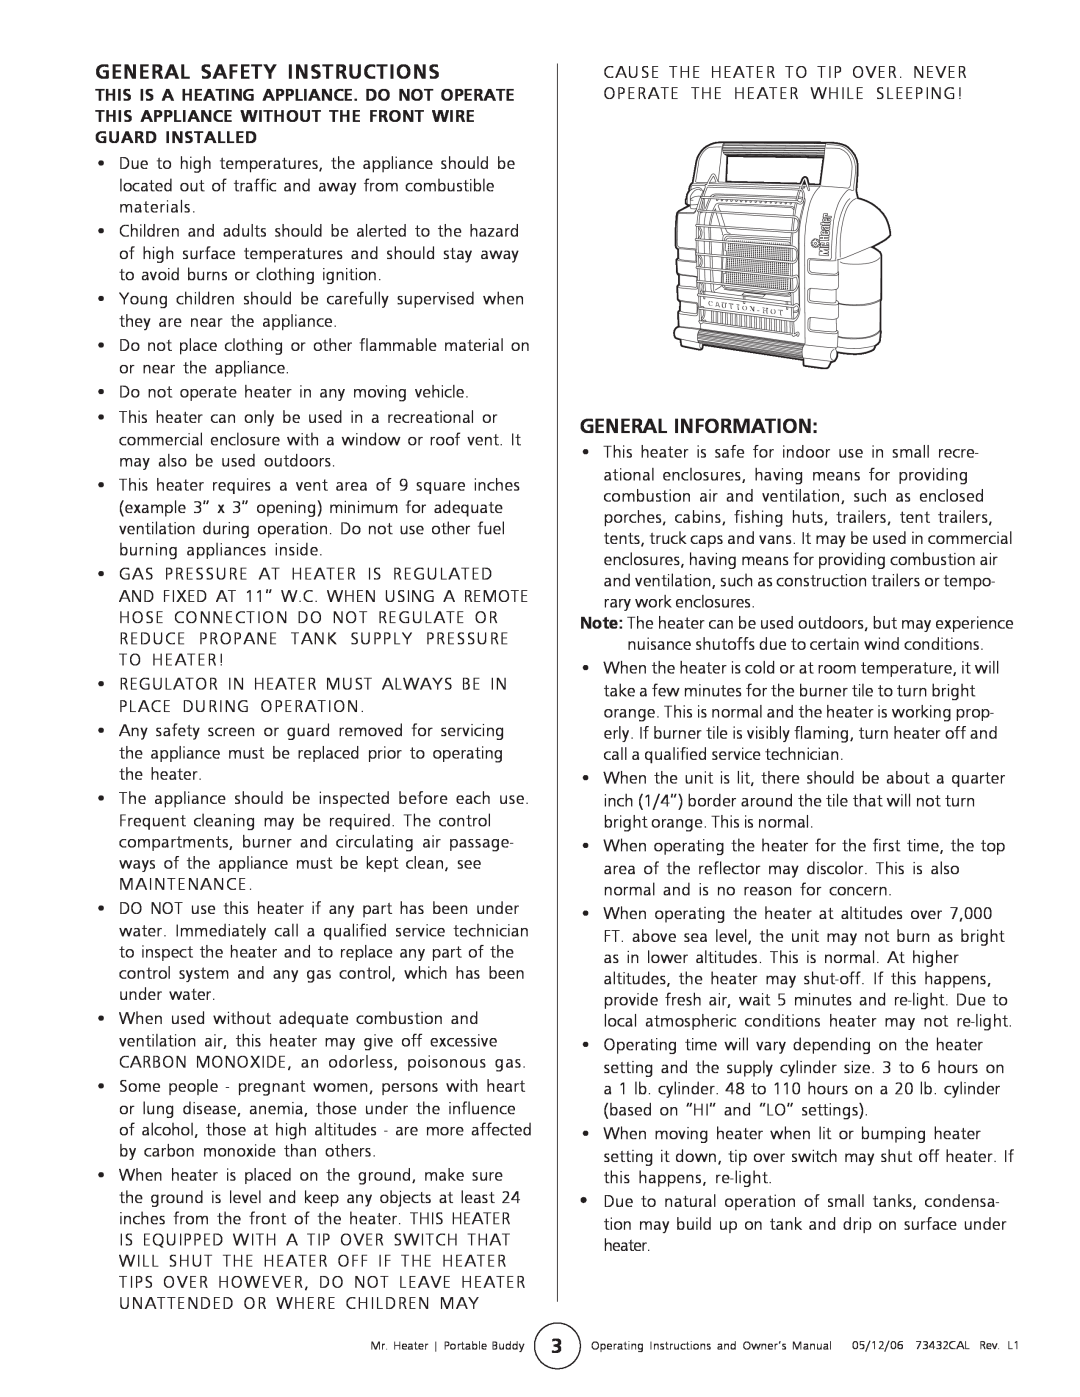 Mr. Heater MH9B owner manual General Safety Instructions, General Information 